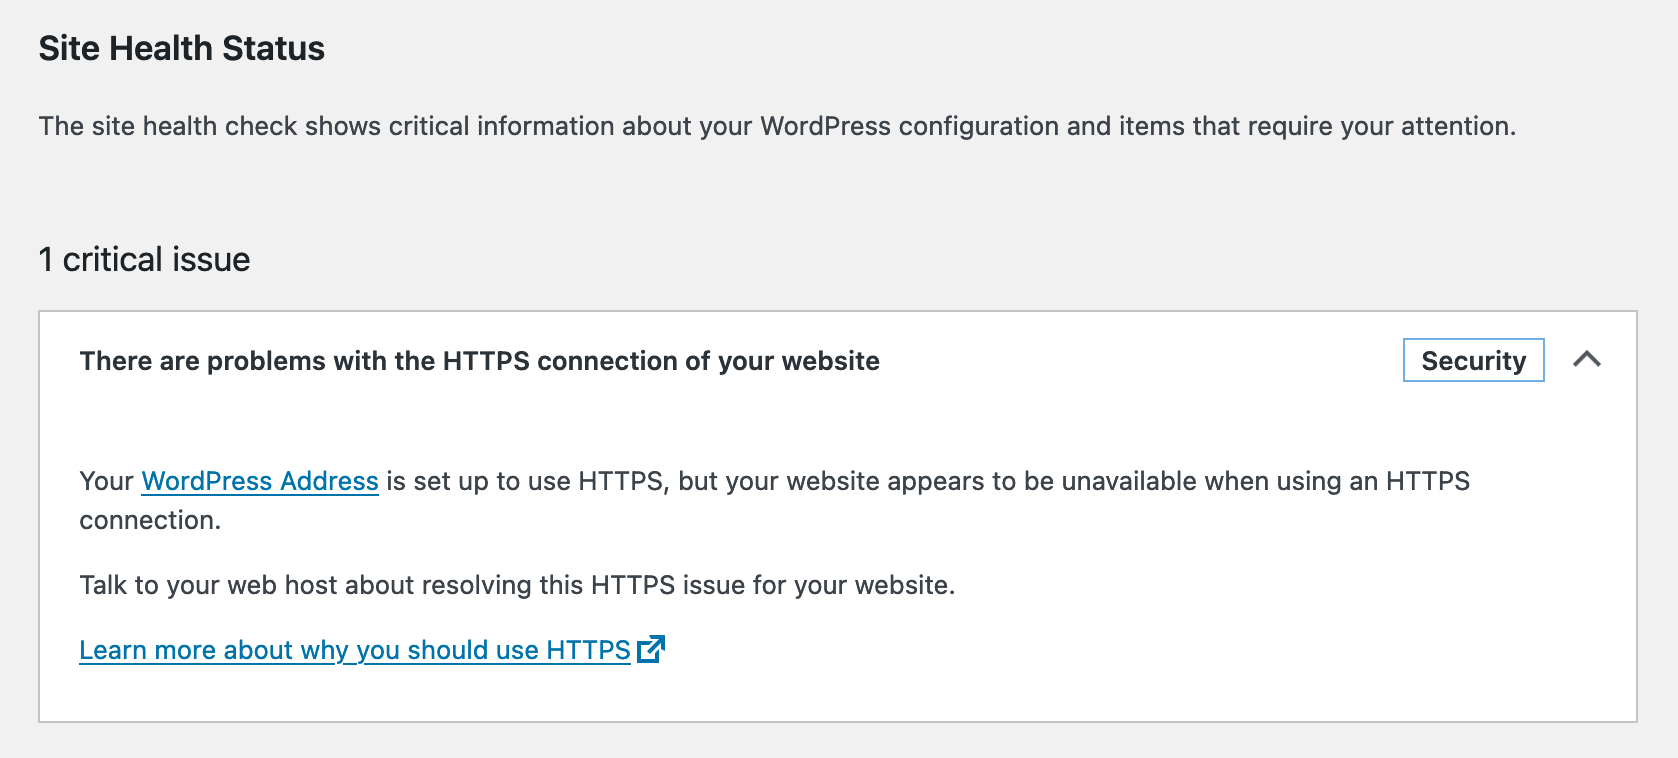 Screen displaying notice that there are problems with the HTTPS connection of a website